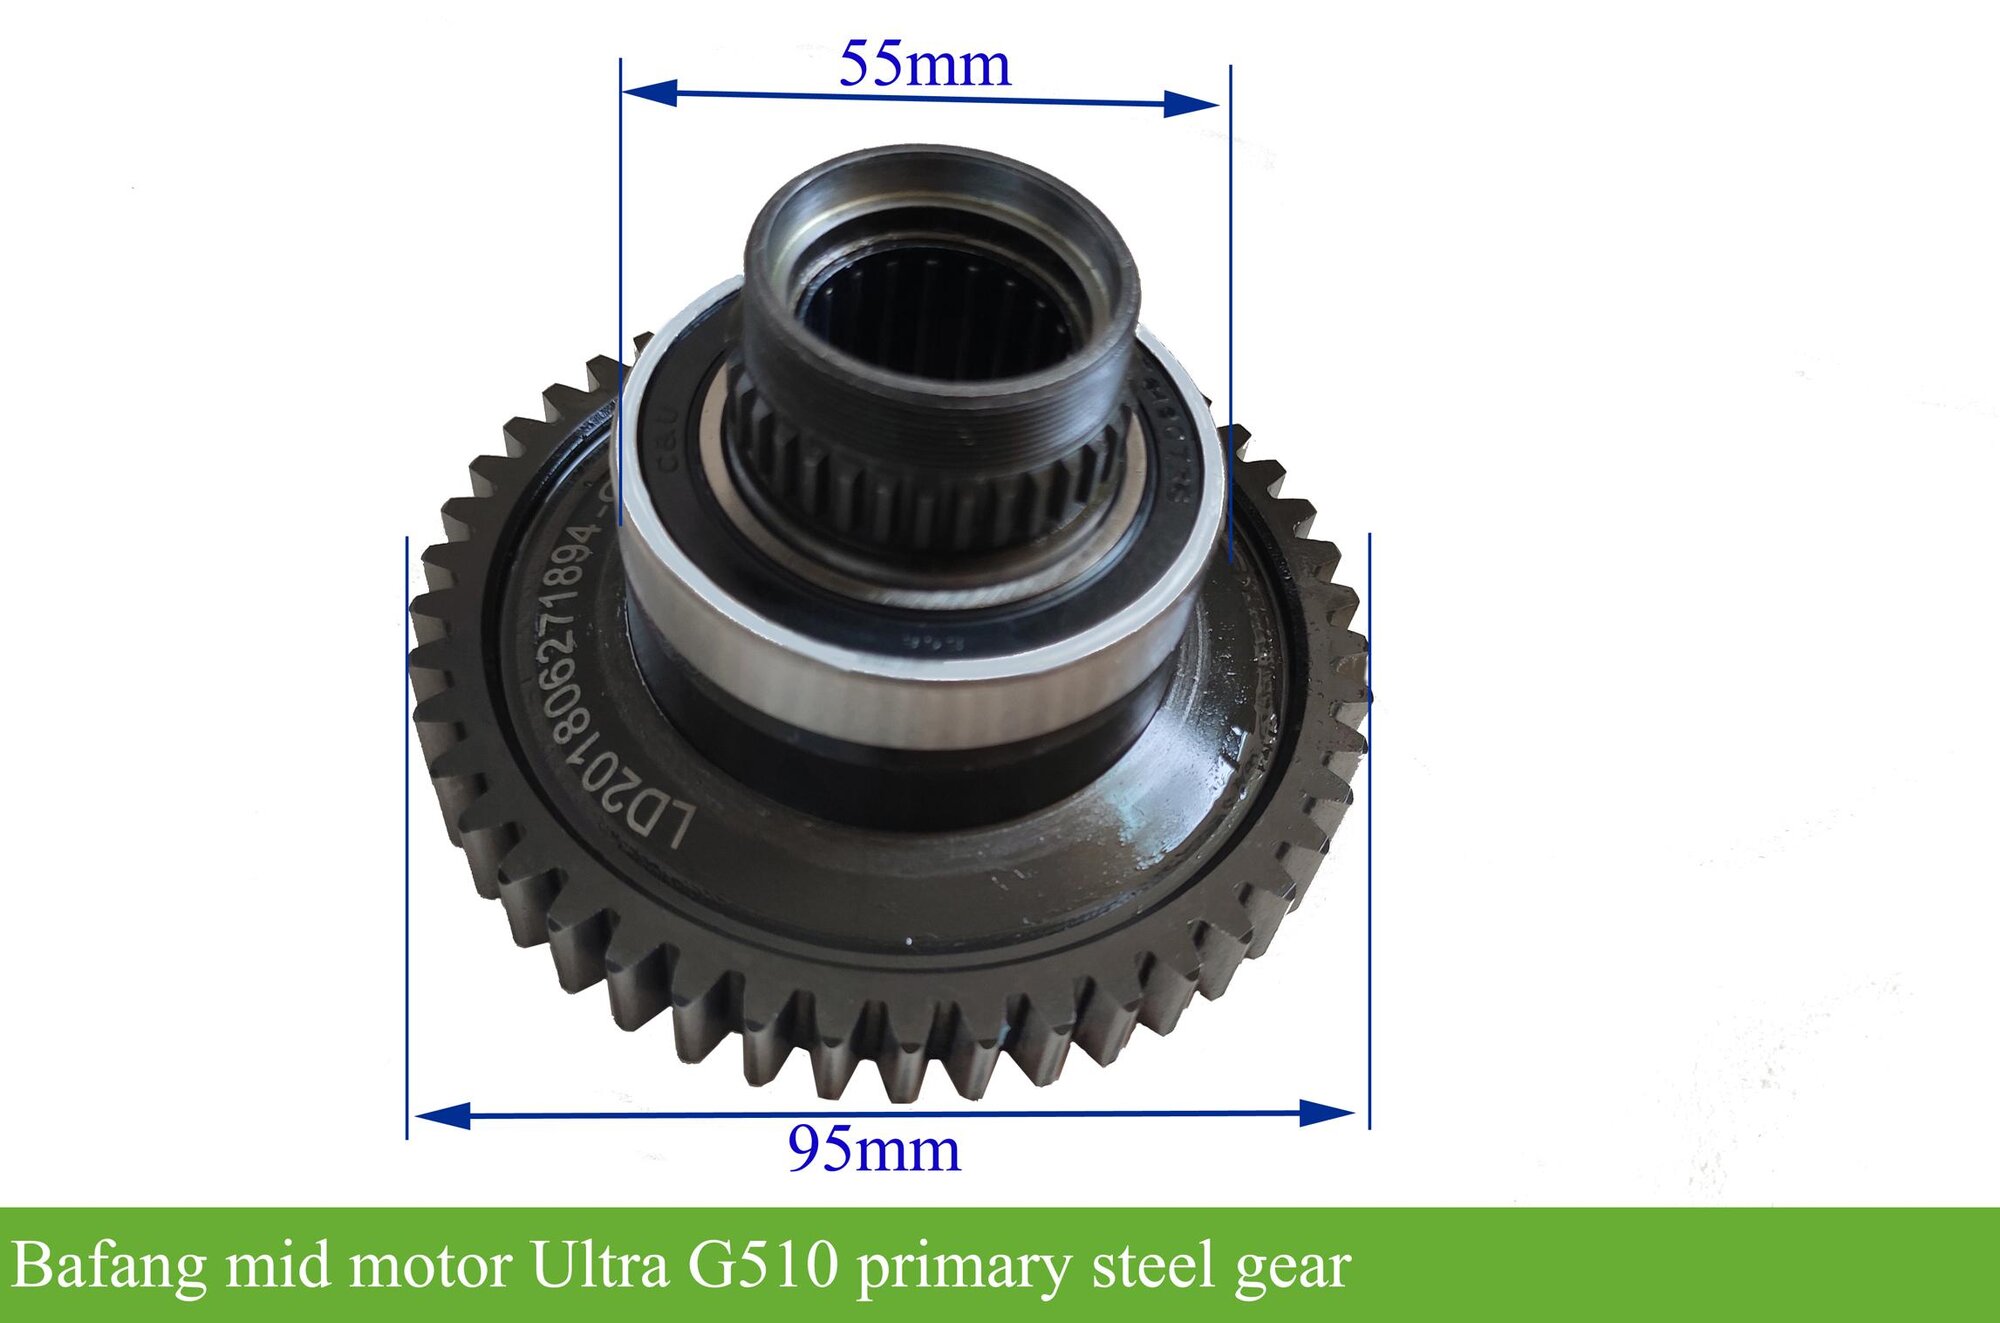 bafang-ultra-g510-primary-steel-gear-for-replacement.jpg